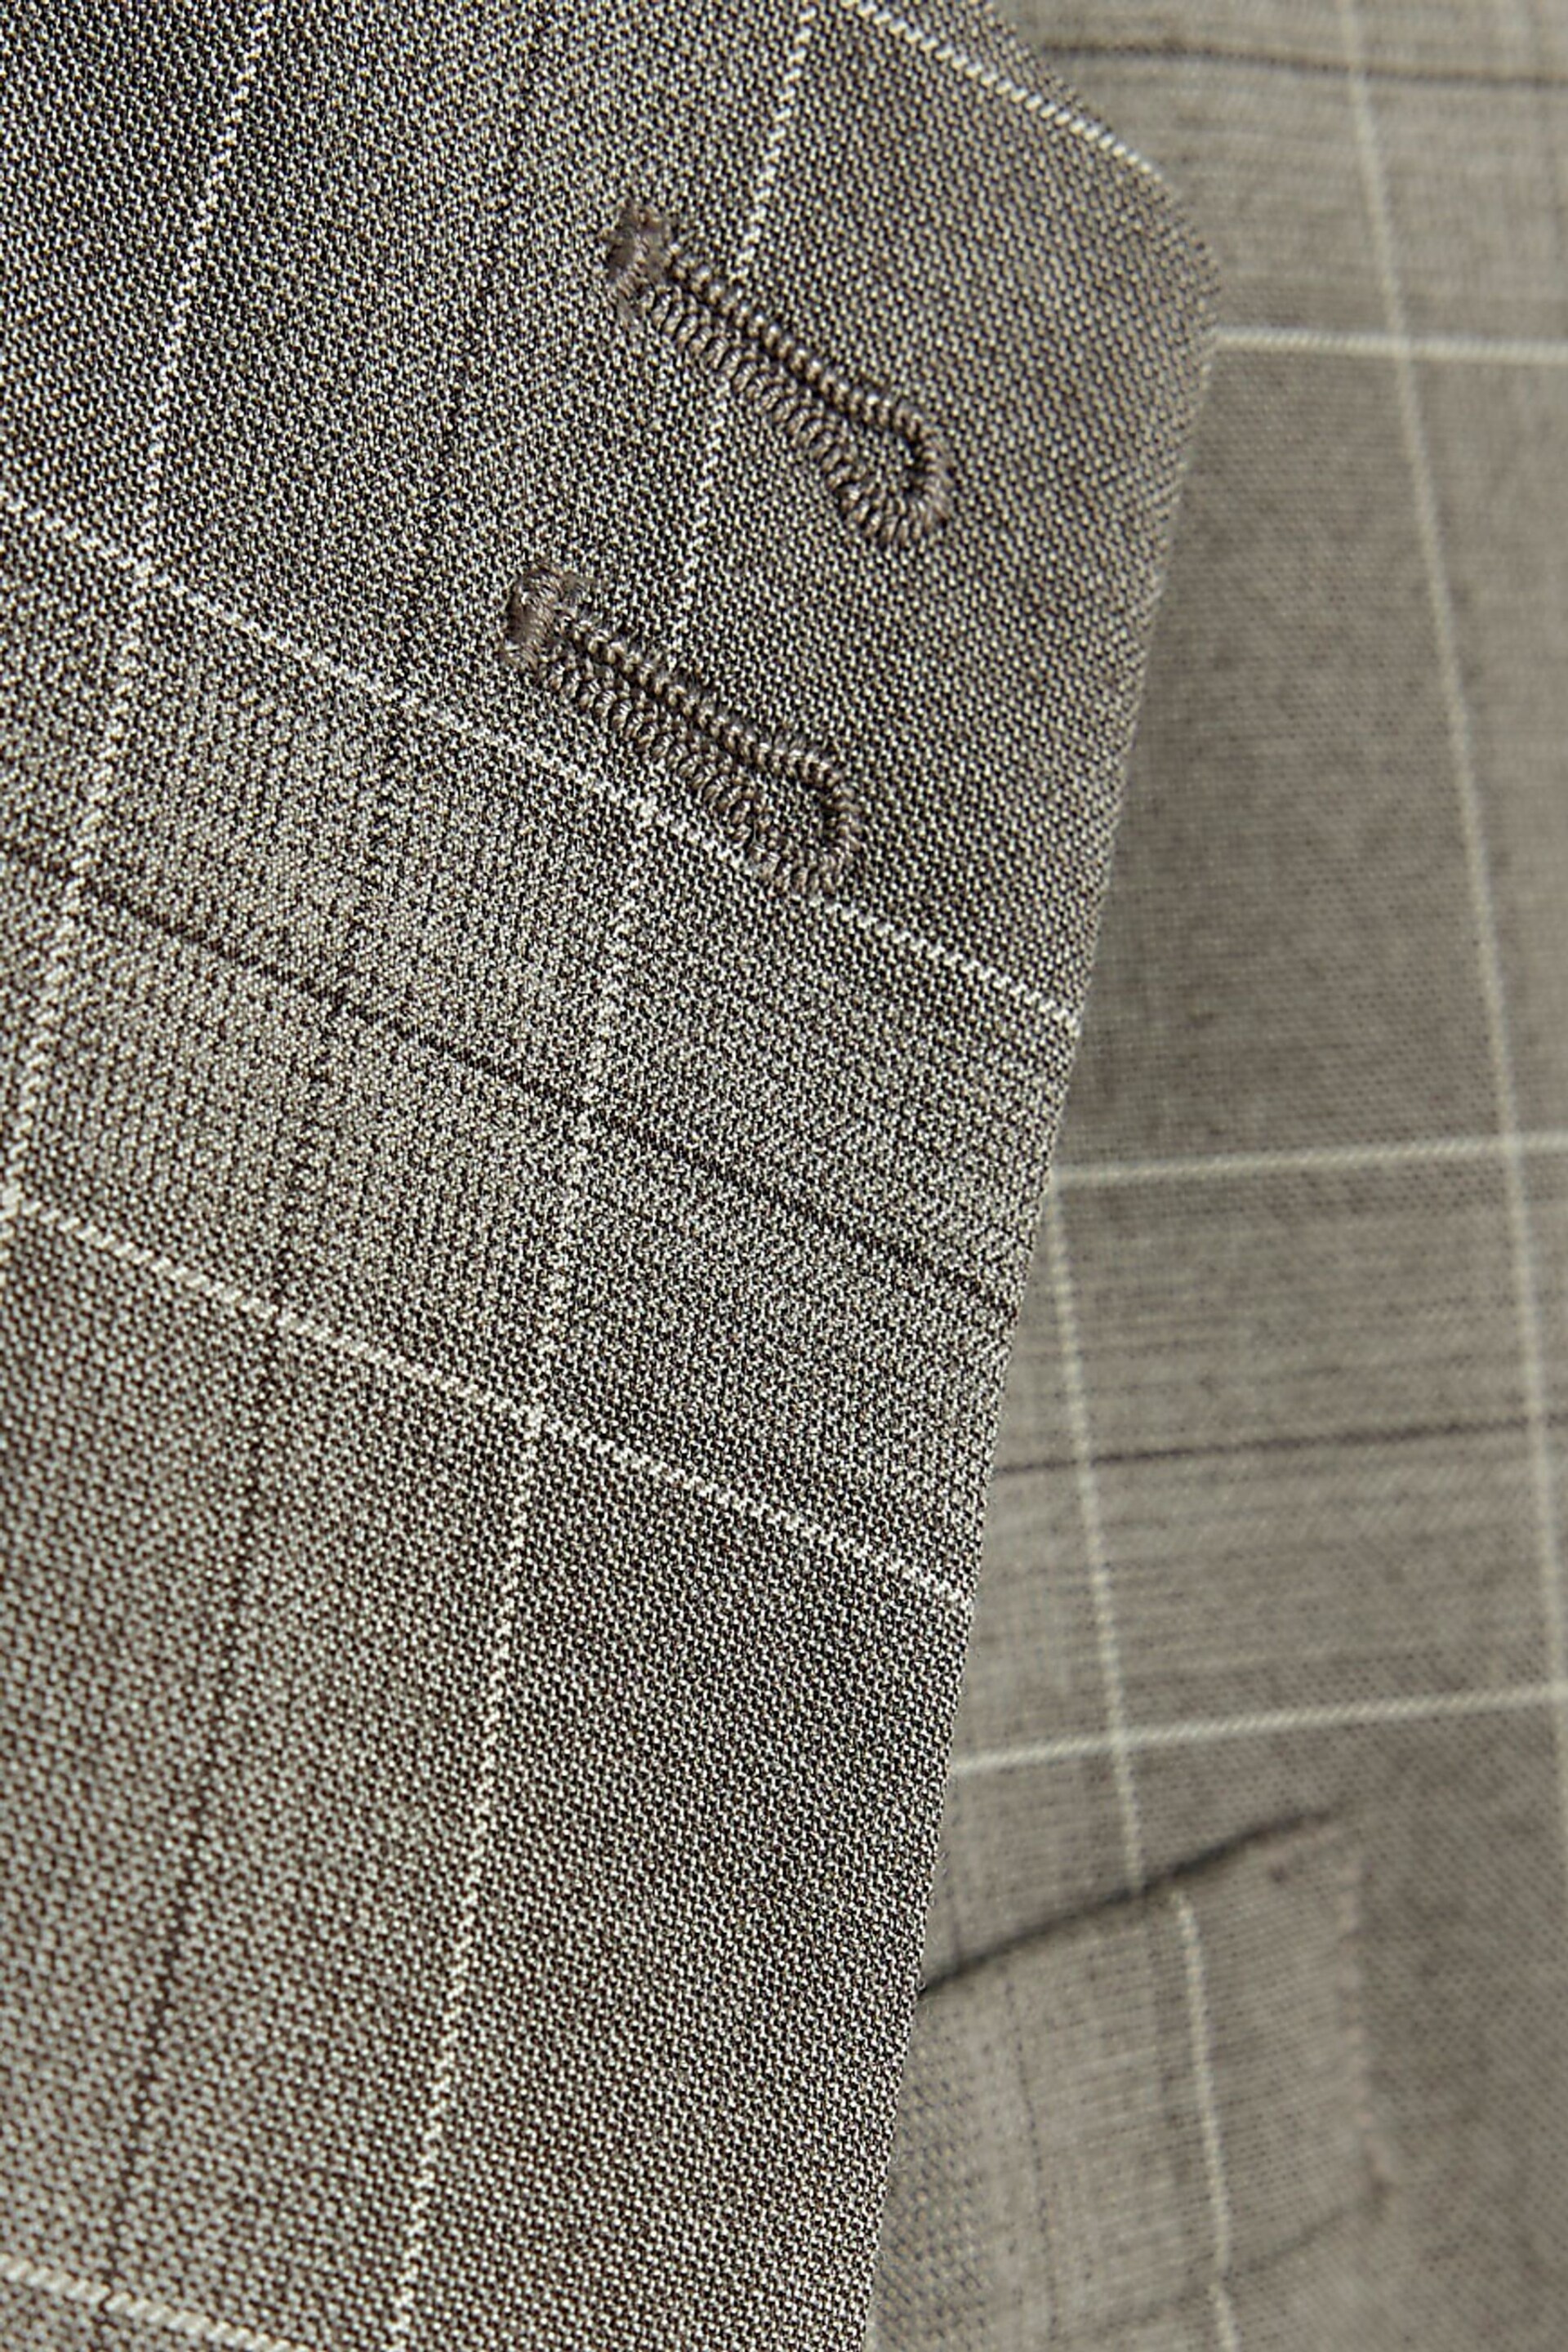 River Island Grey Big & Tall Notch Check Suit: Jacket - Image 6 of 6